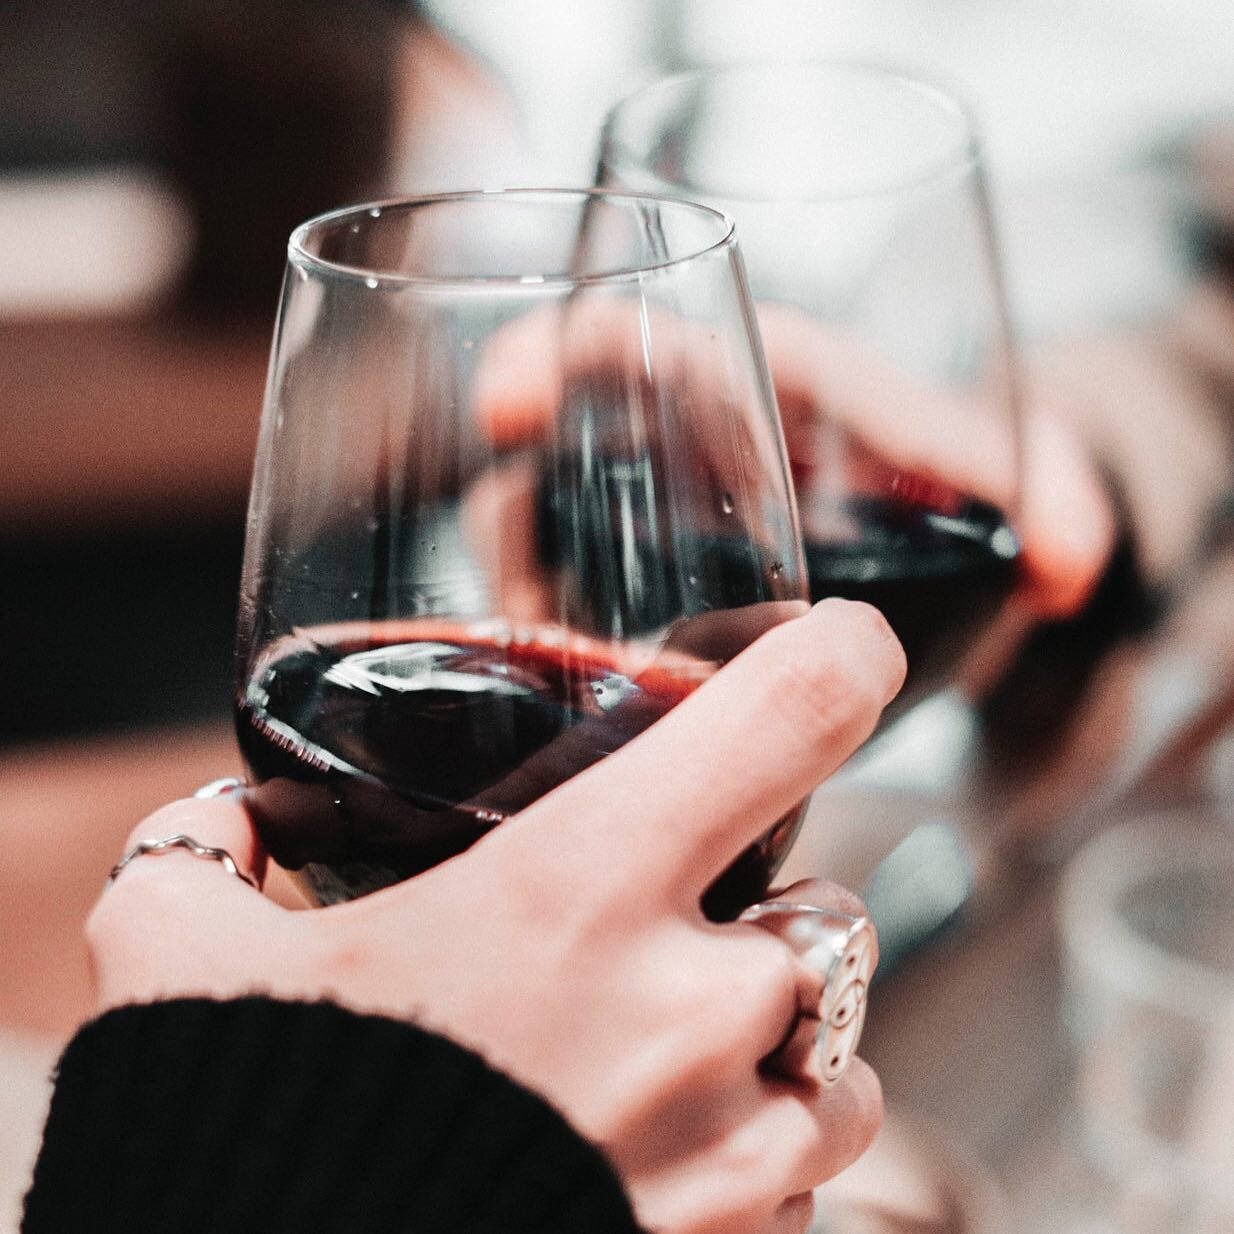 Okay, so it&rsquo;s Monday again but who said Monday&rsquo;s can&rsquo;t be amazing. Have a great day and enjoy *HALF OFF SELECT* bottles from our wine list 🍷🥂✨ #houseoflumarietta #mariettasquare #winelovers